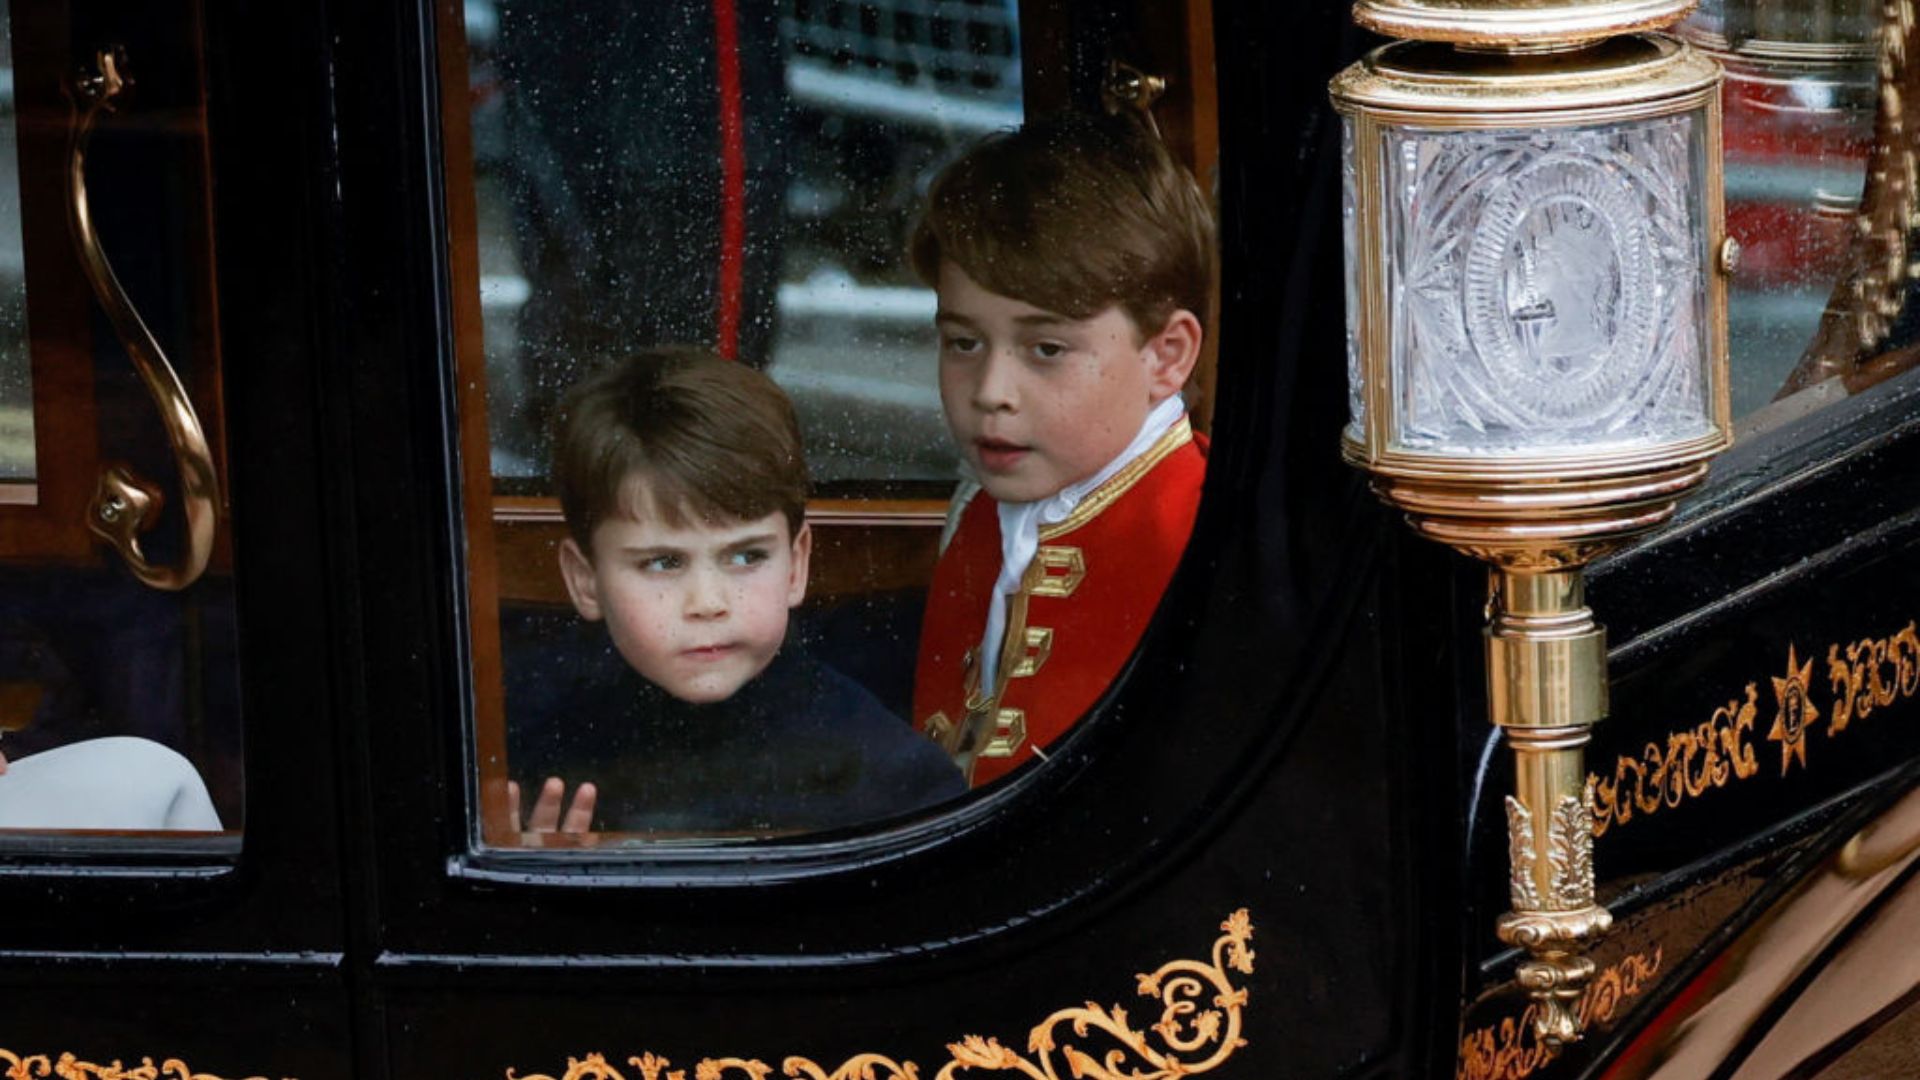 Prince George at the coronation